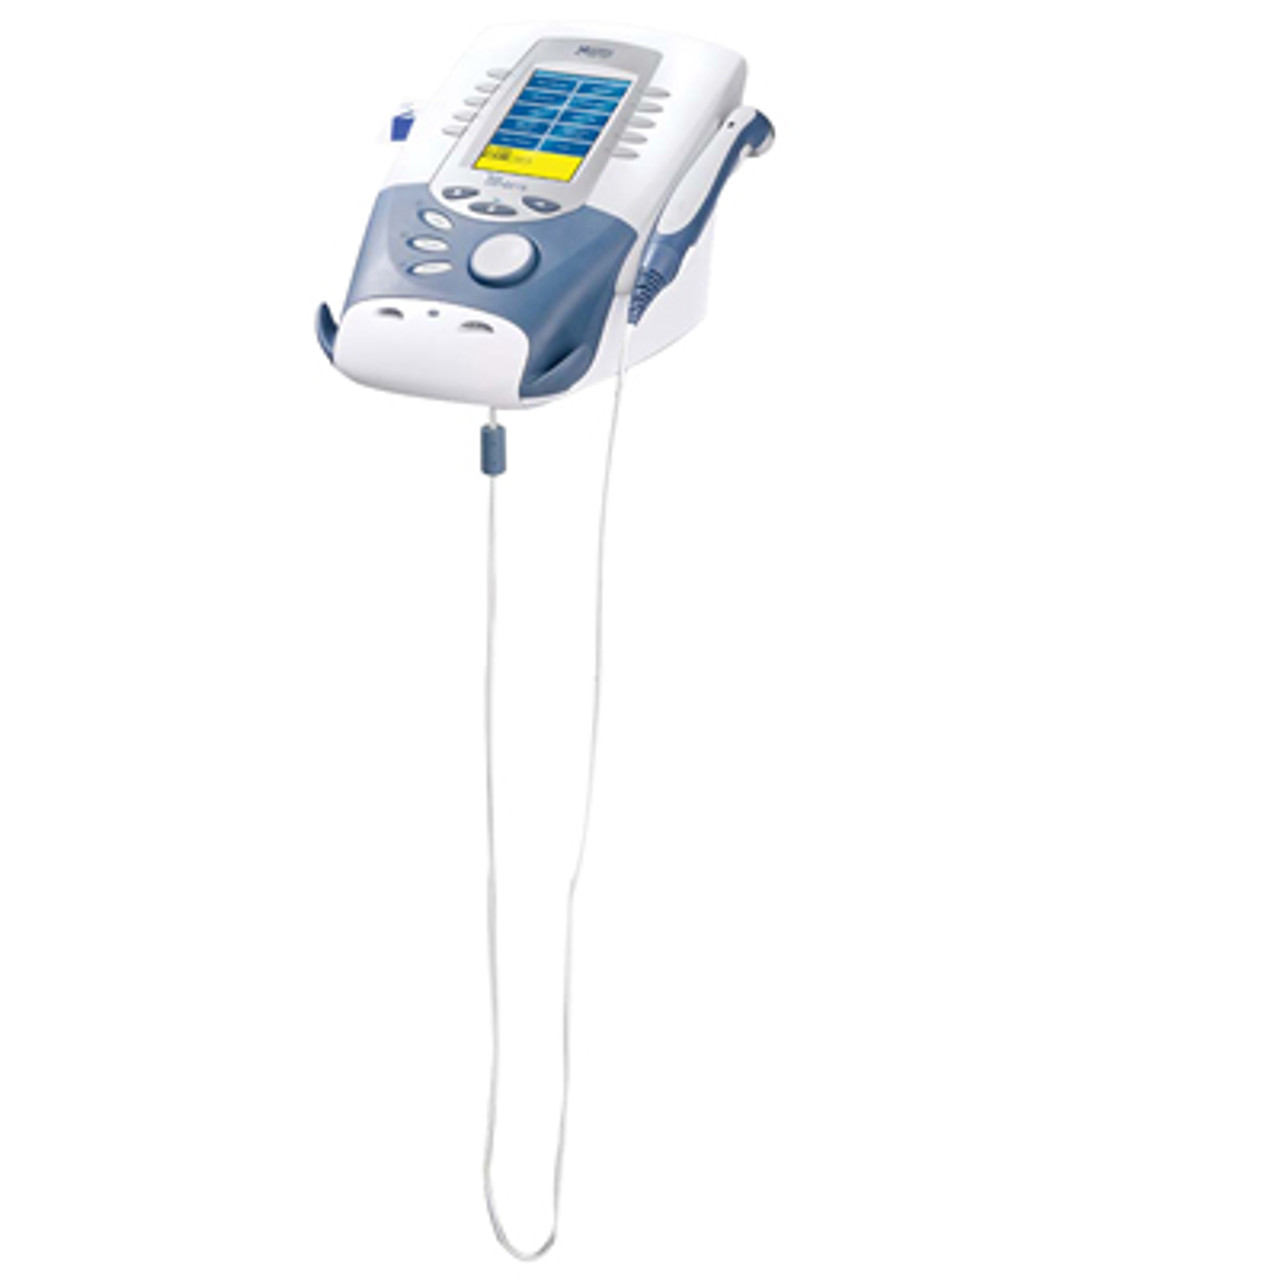 https://cdn11.bigcommerce.com/s-13ttxa/images/stencil/1280x1280/products/20361/21704/Vectra_Genisys_Ultrasound_E-Stim_and_Laser_Therapy_Device__41381.1580961996.jpg?c=2